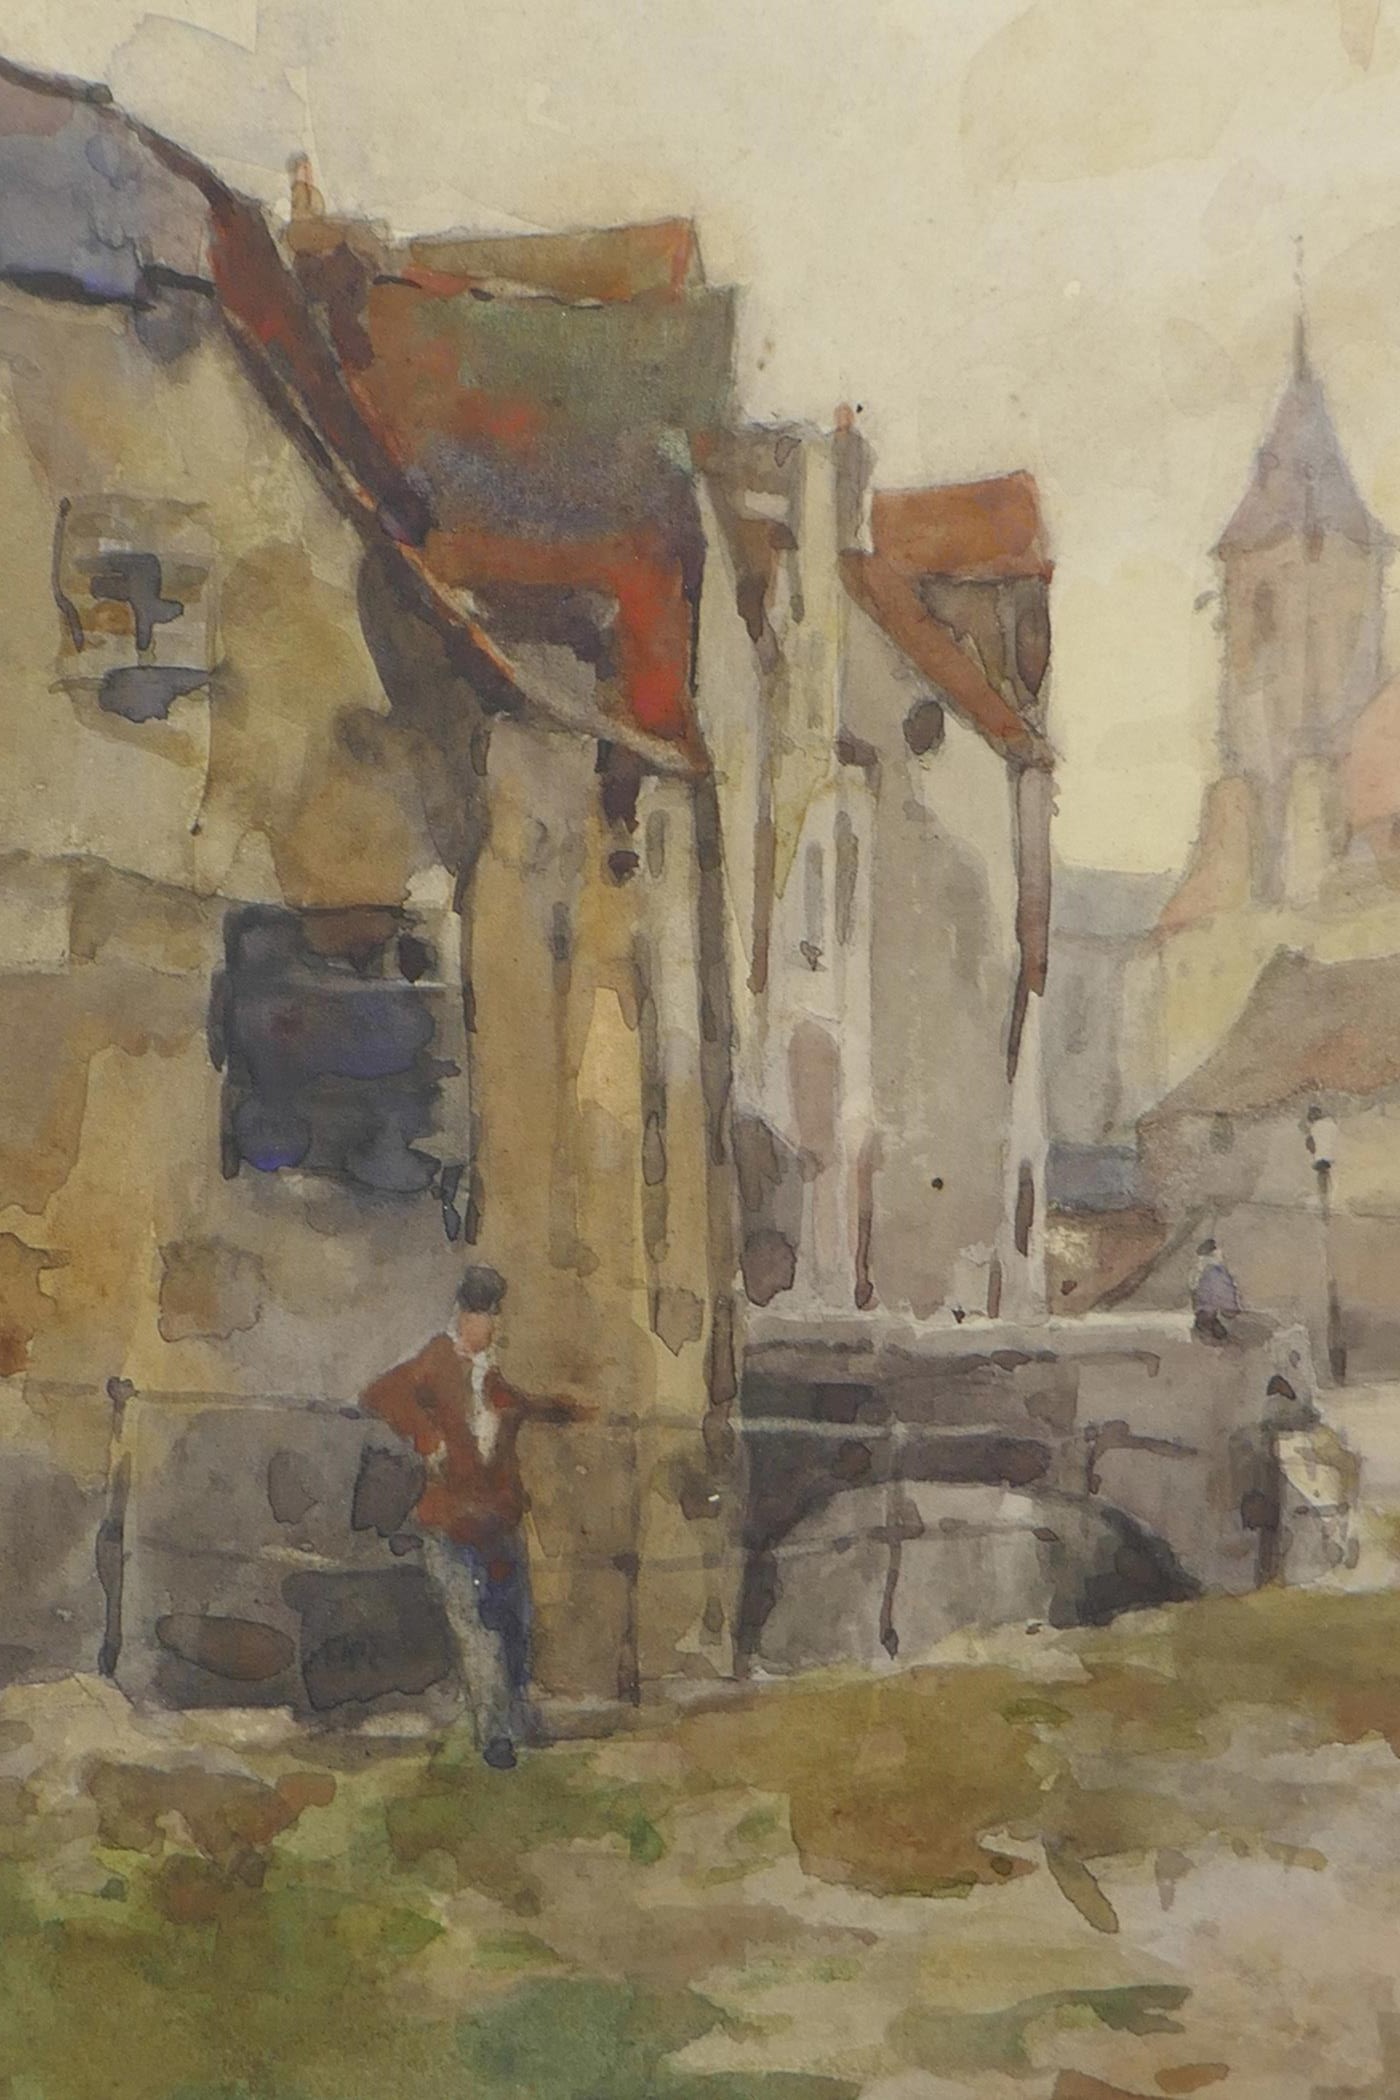 Street scene with figure by canal railings, signed 'Rose Burton', unframed watercolour, 10½" x 9"